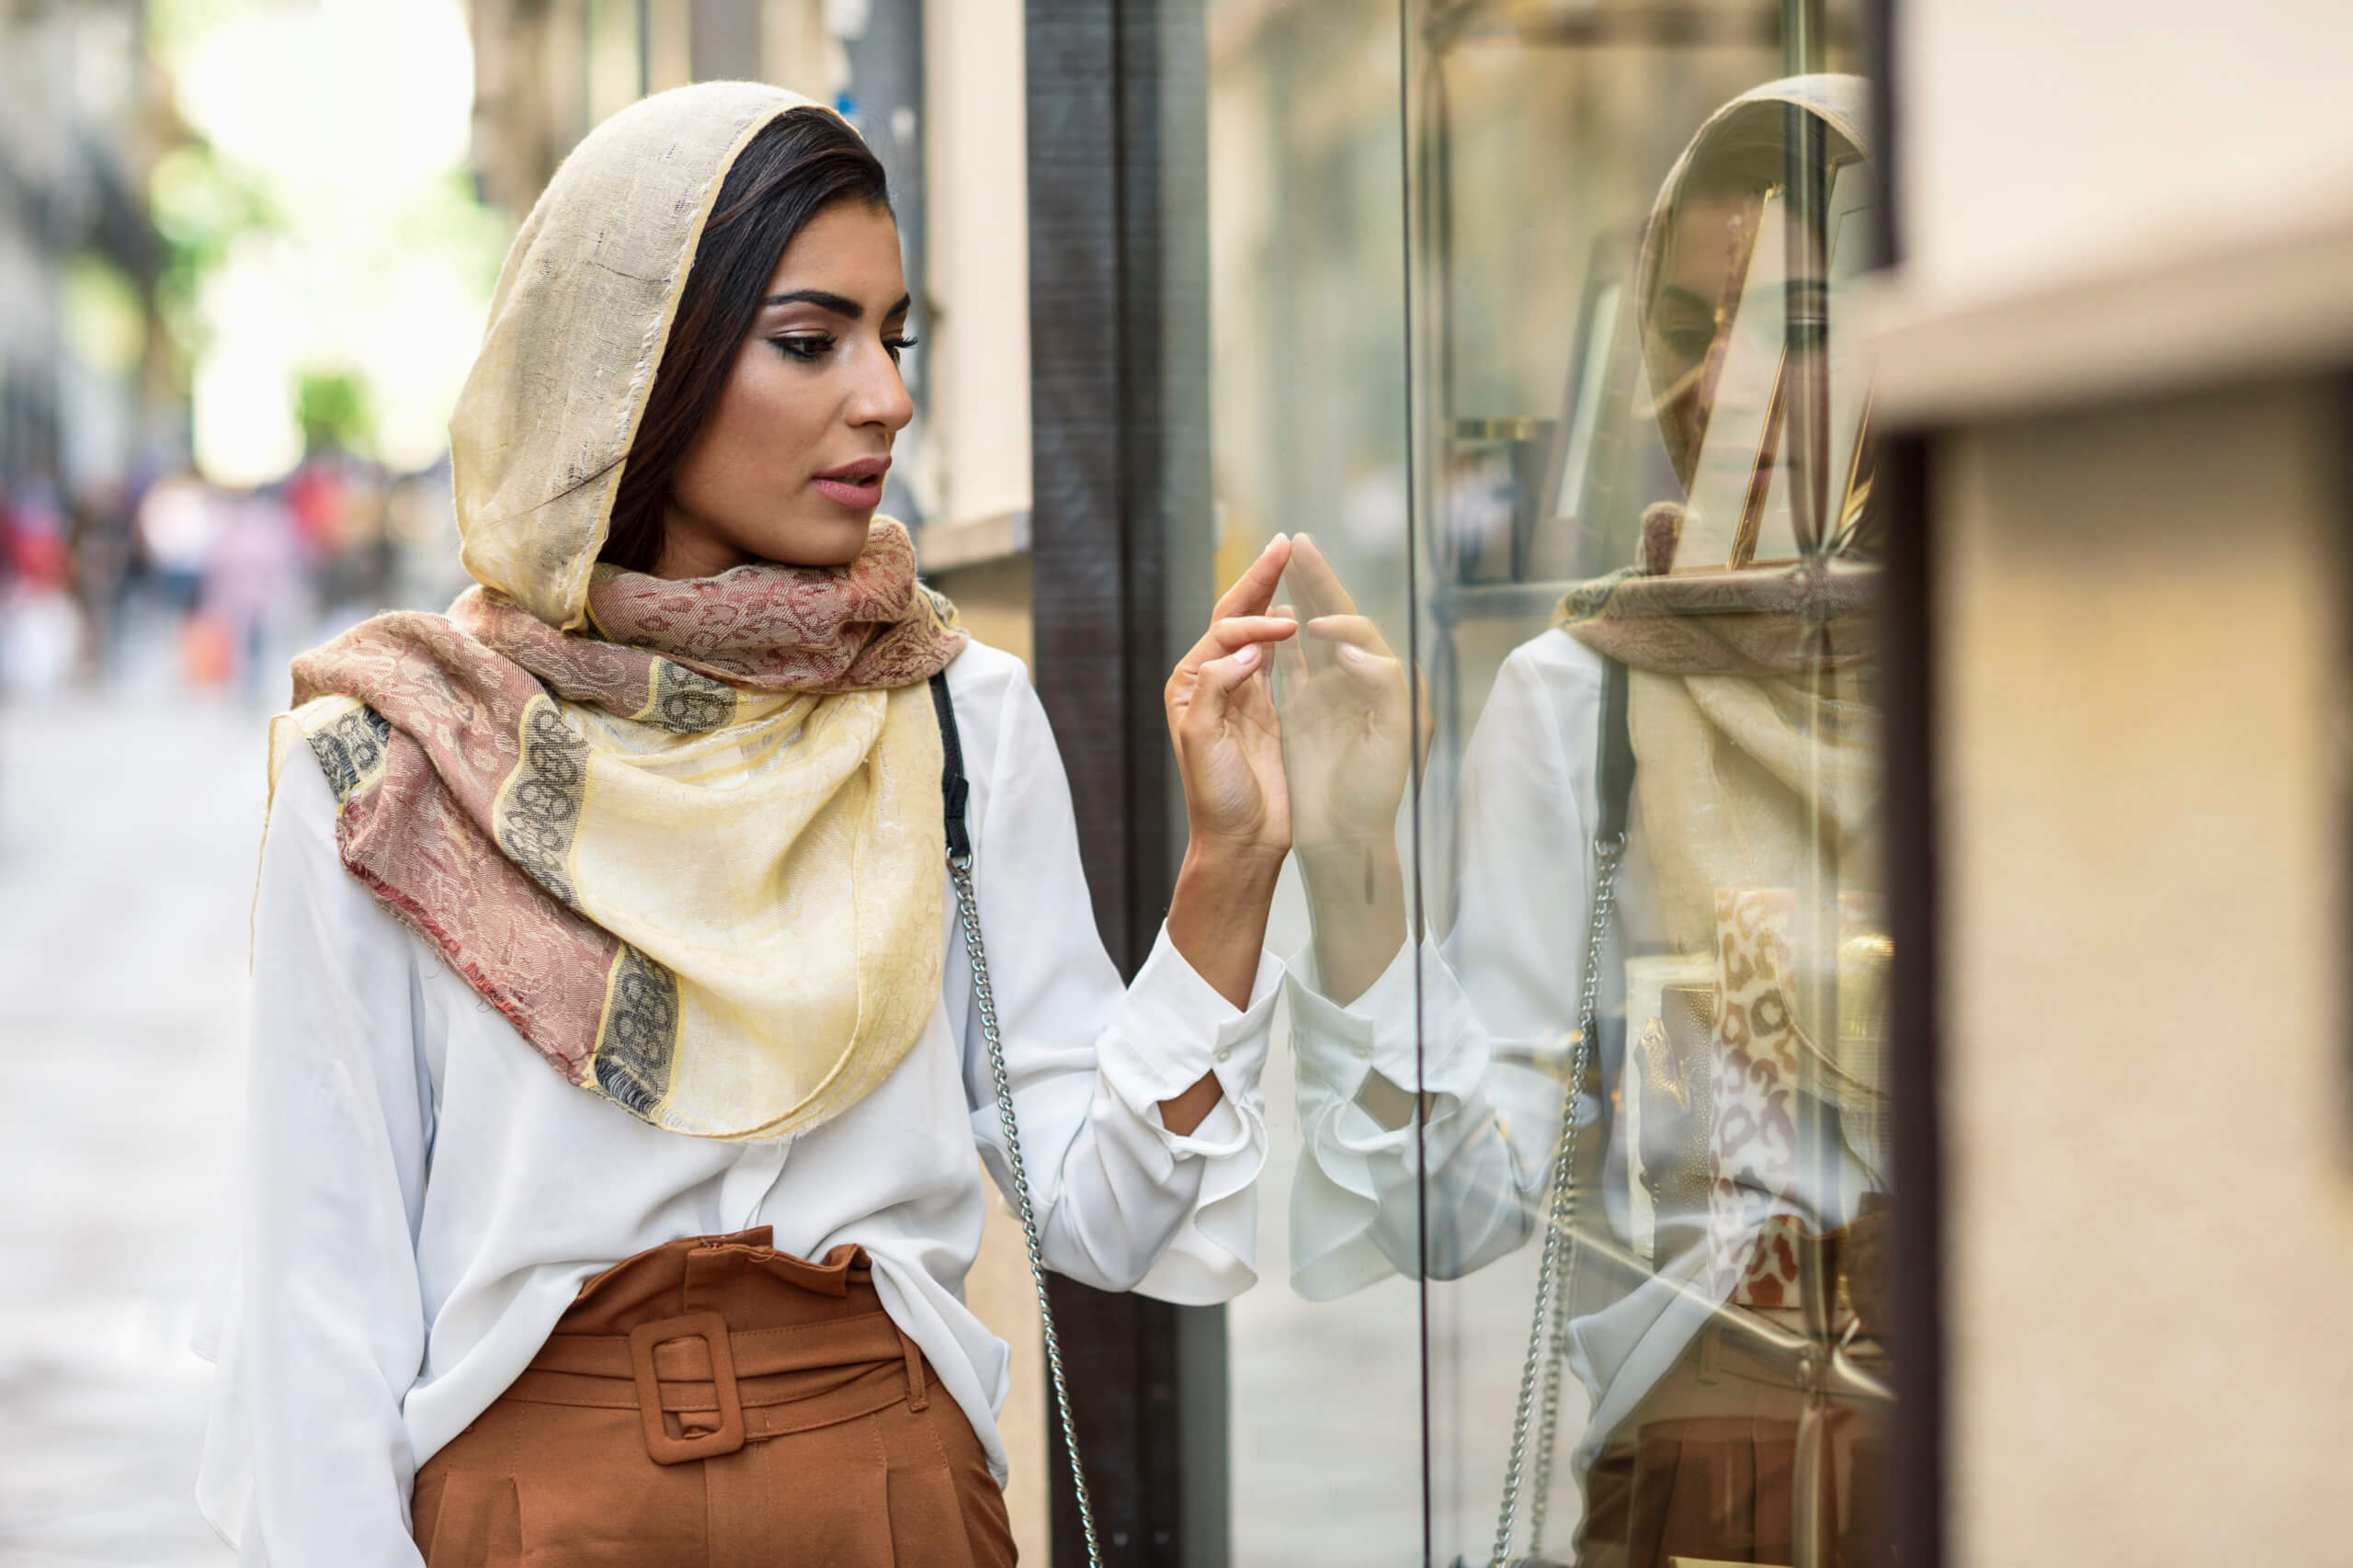 Spain, Granada, young muslim tourist woman wearing hijab looking at shop windows on a shopping street